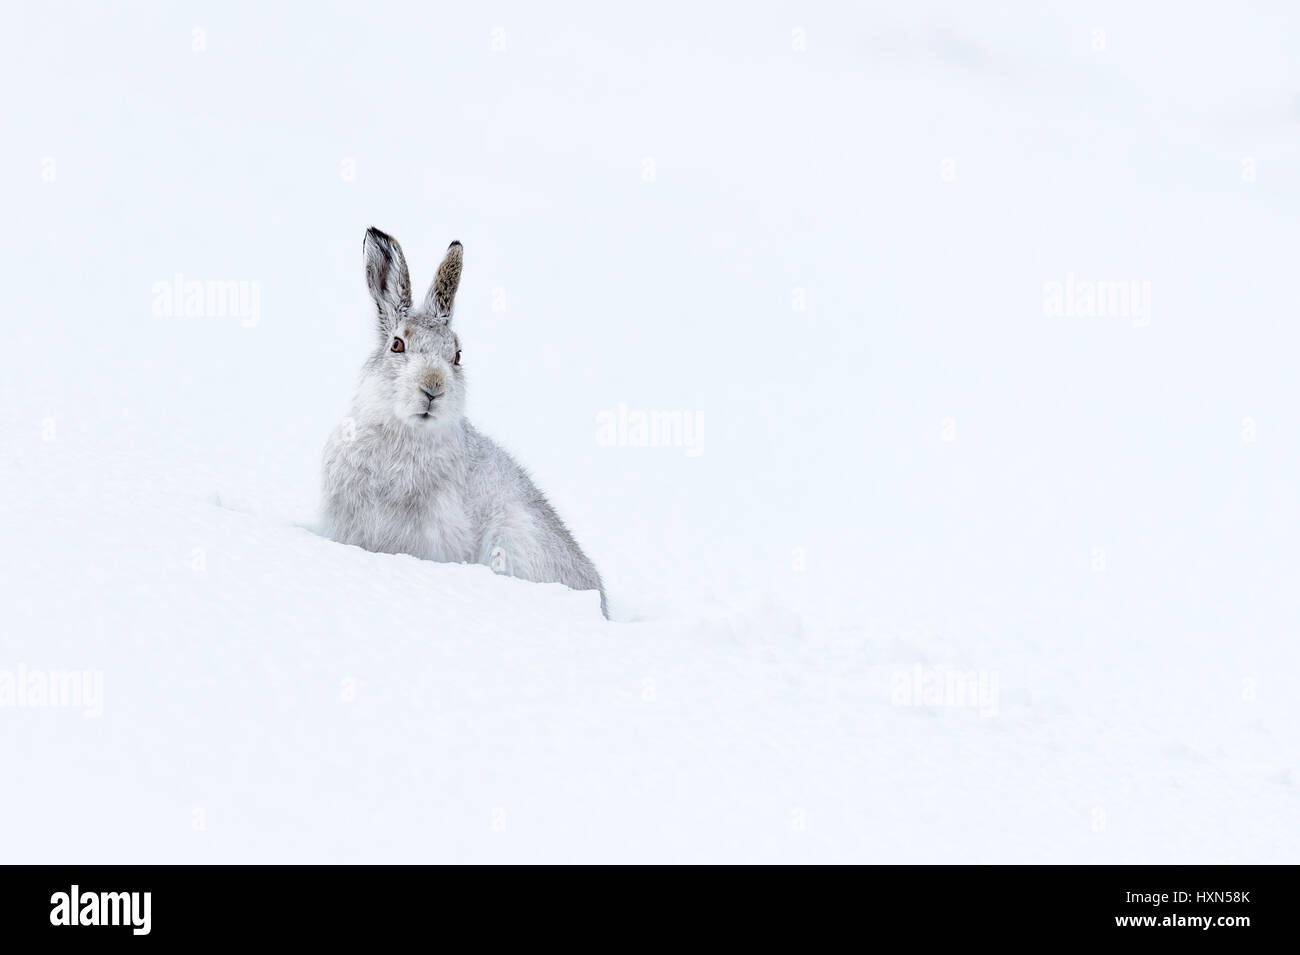 Mountain hare (Lepus timidus) in winter coat, in snow field. Cairngorms National Park, Scotland. February. Stock Photo